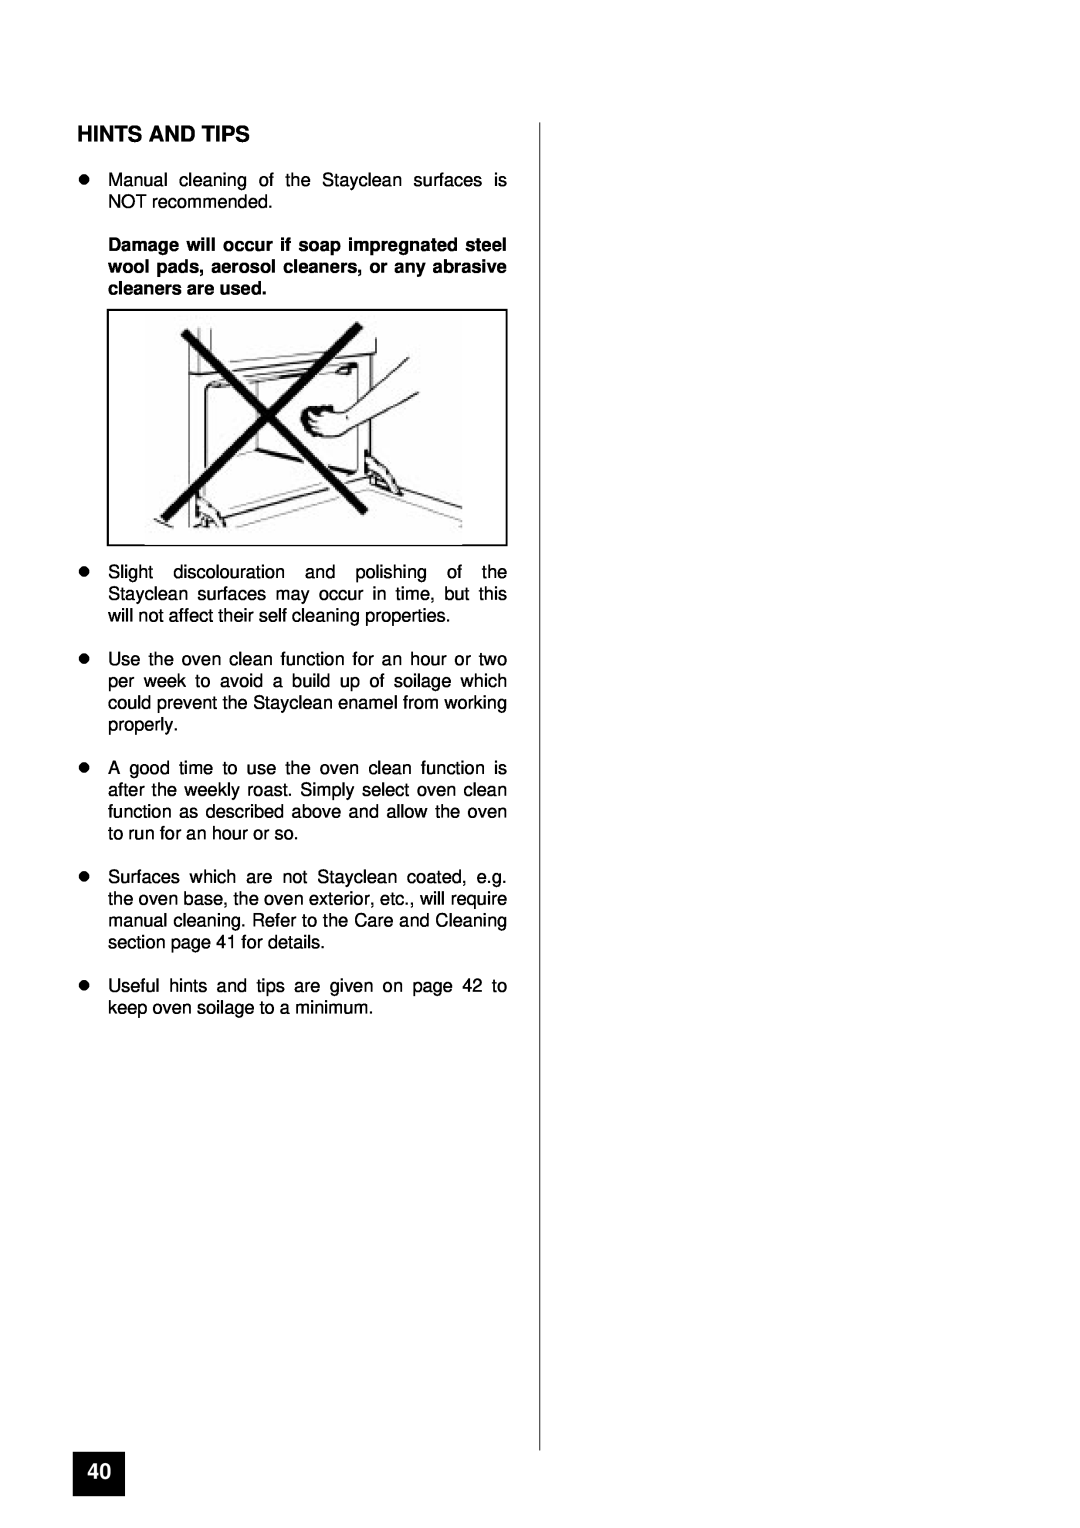 Tricity Bendix BS 631/2 installation instructions lHINTS AND TIPS, lsection page 41 for details 